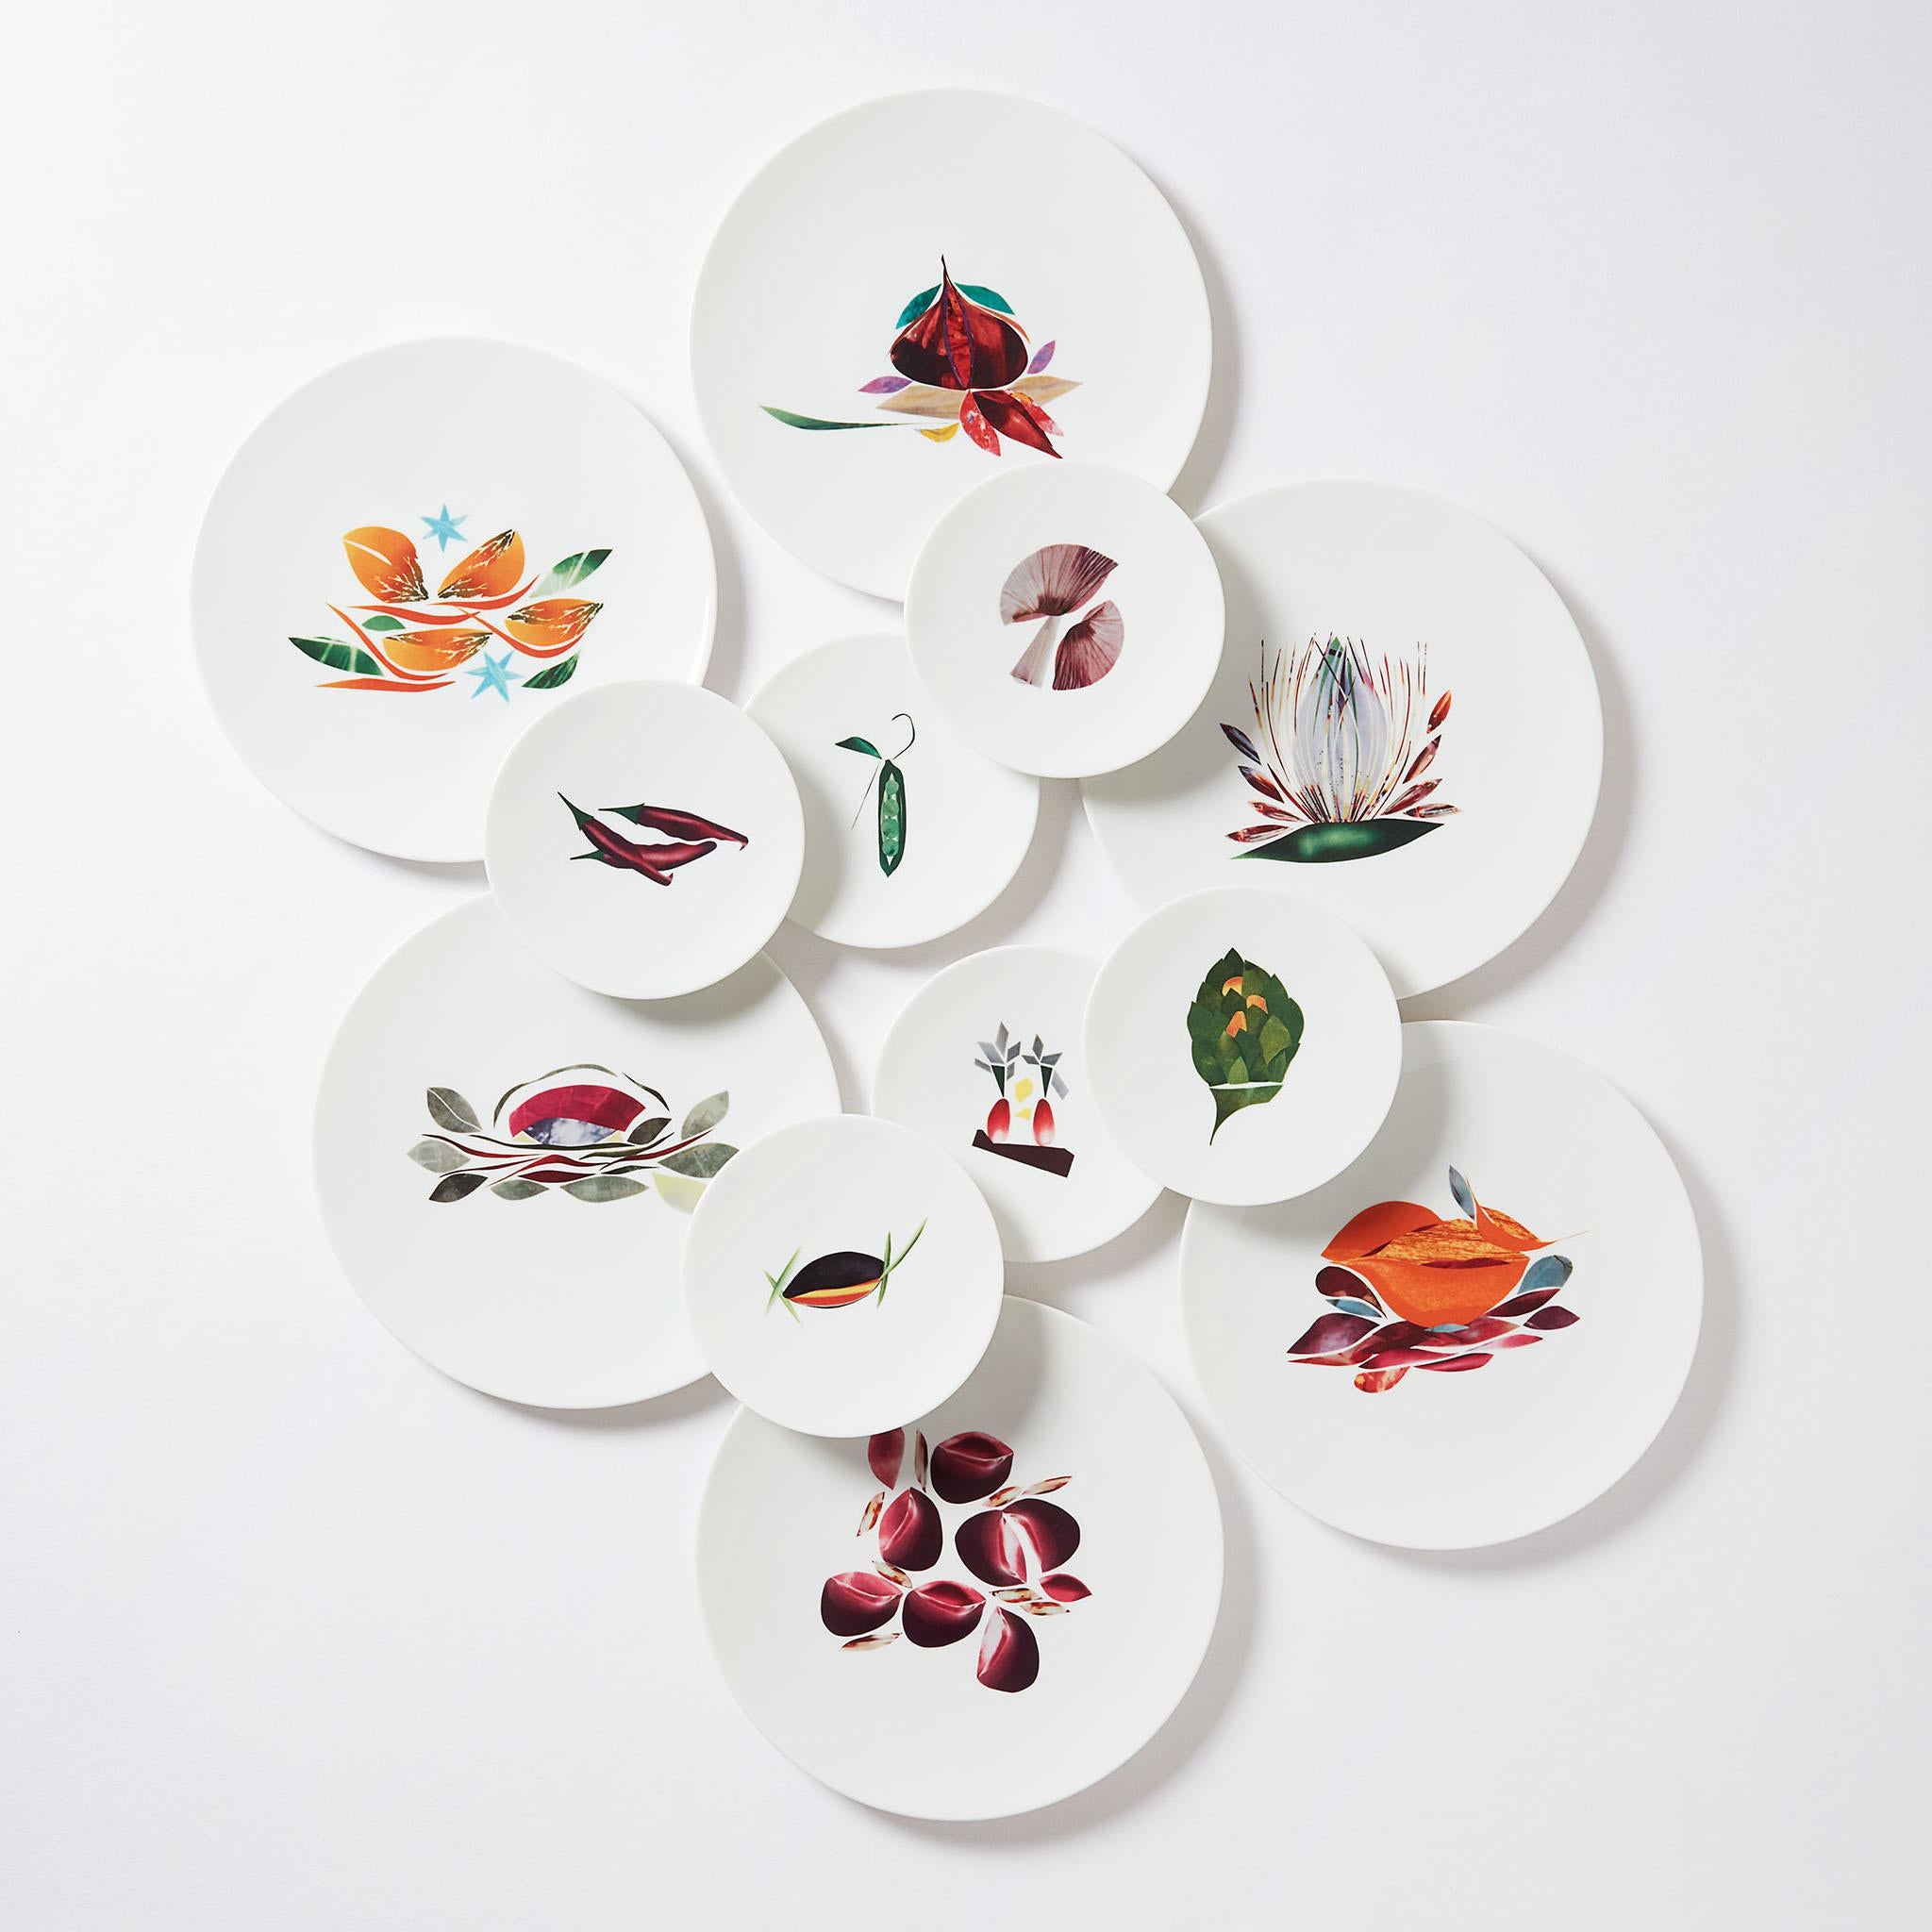 Bread Porcelain Plate By The Chef Alain Passard Model 